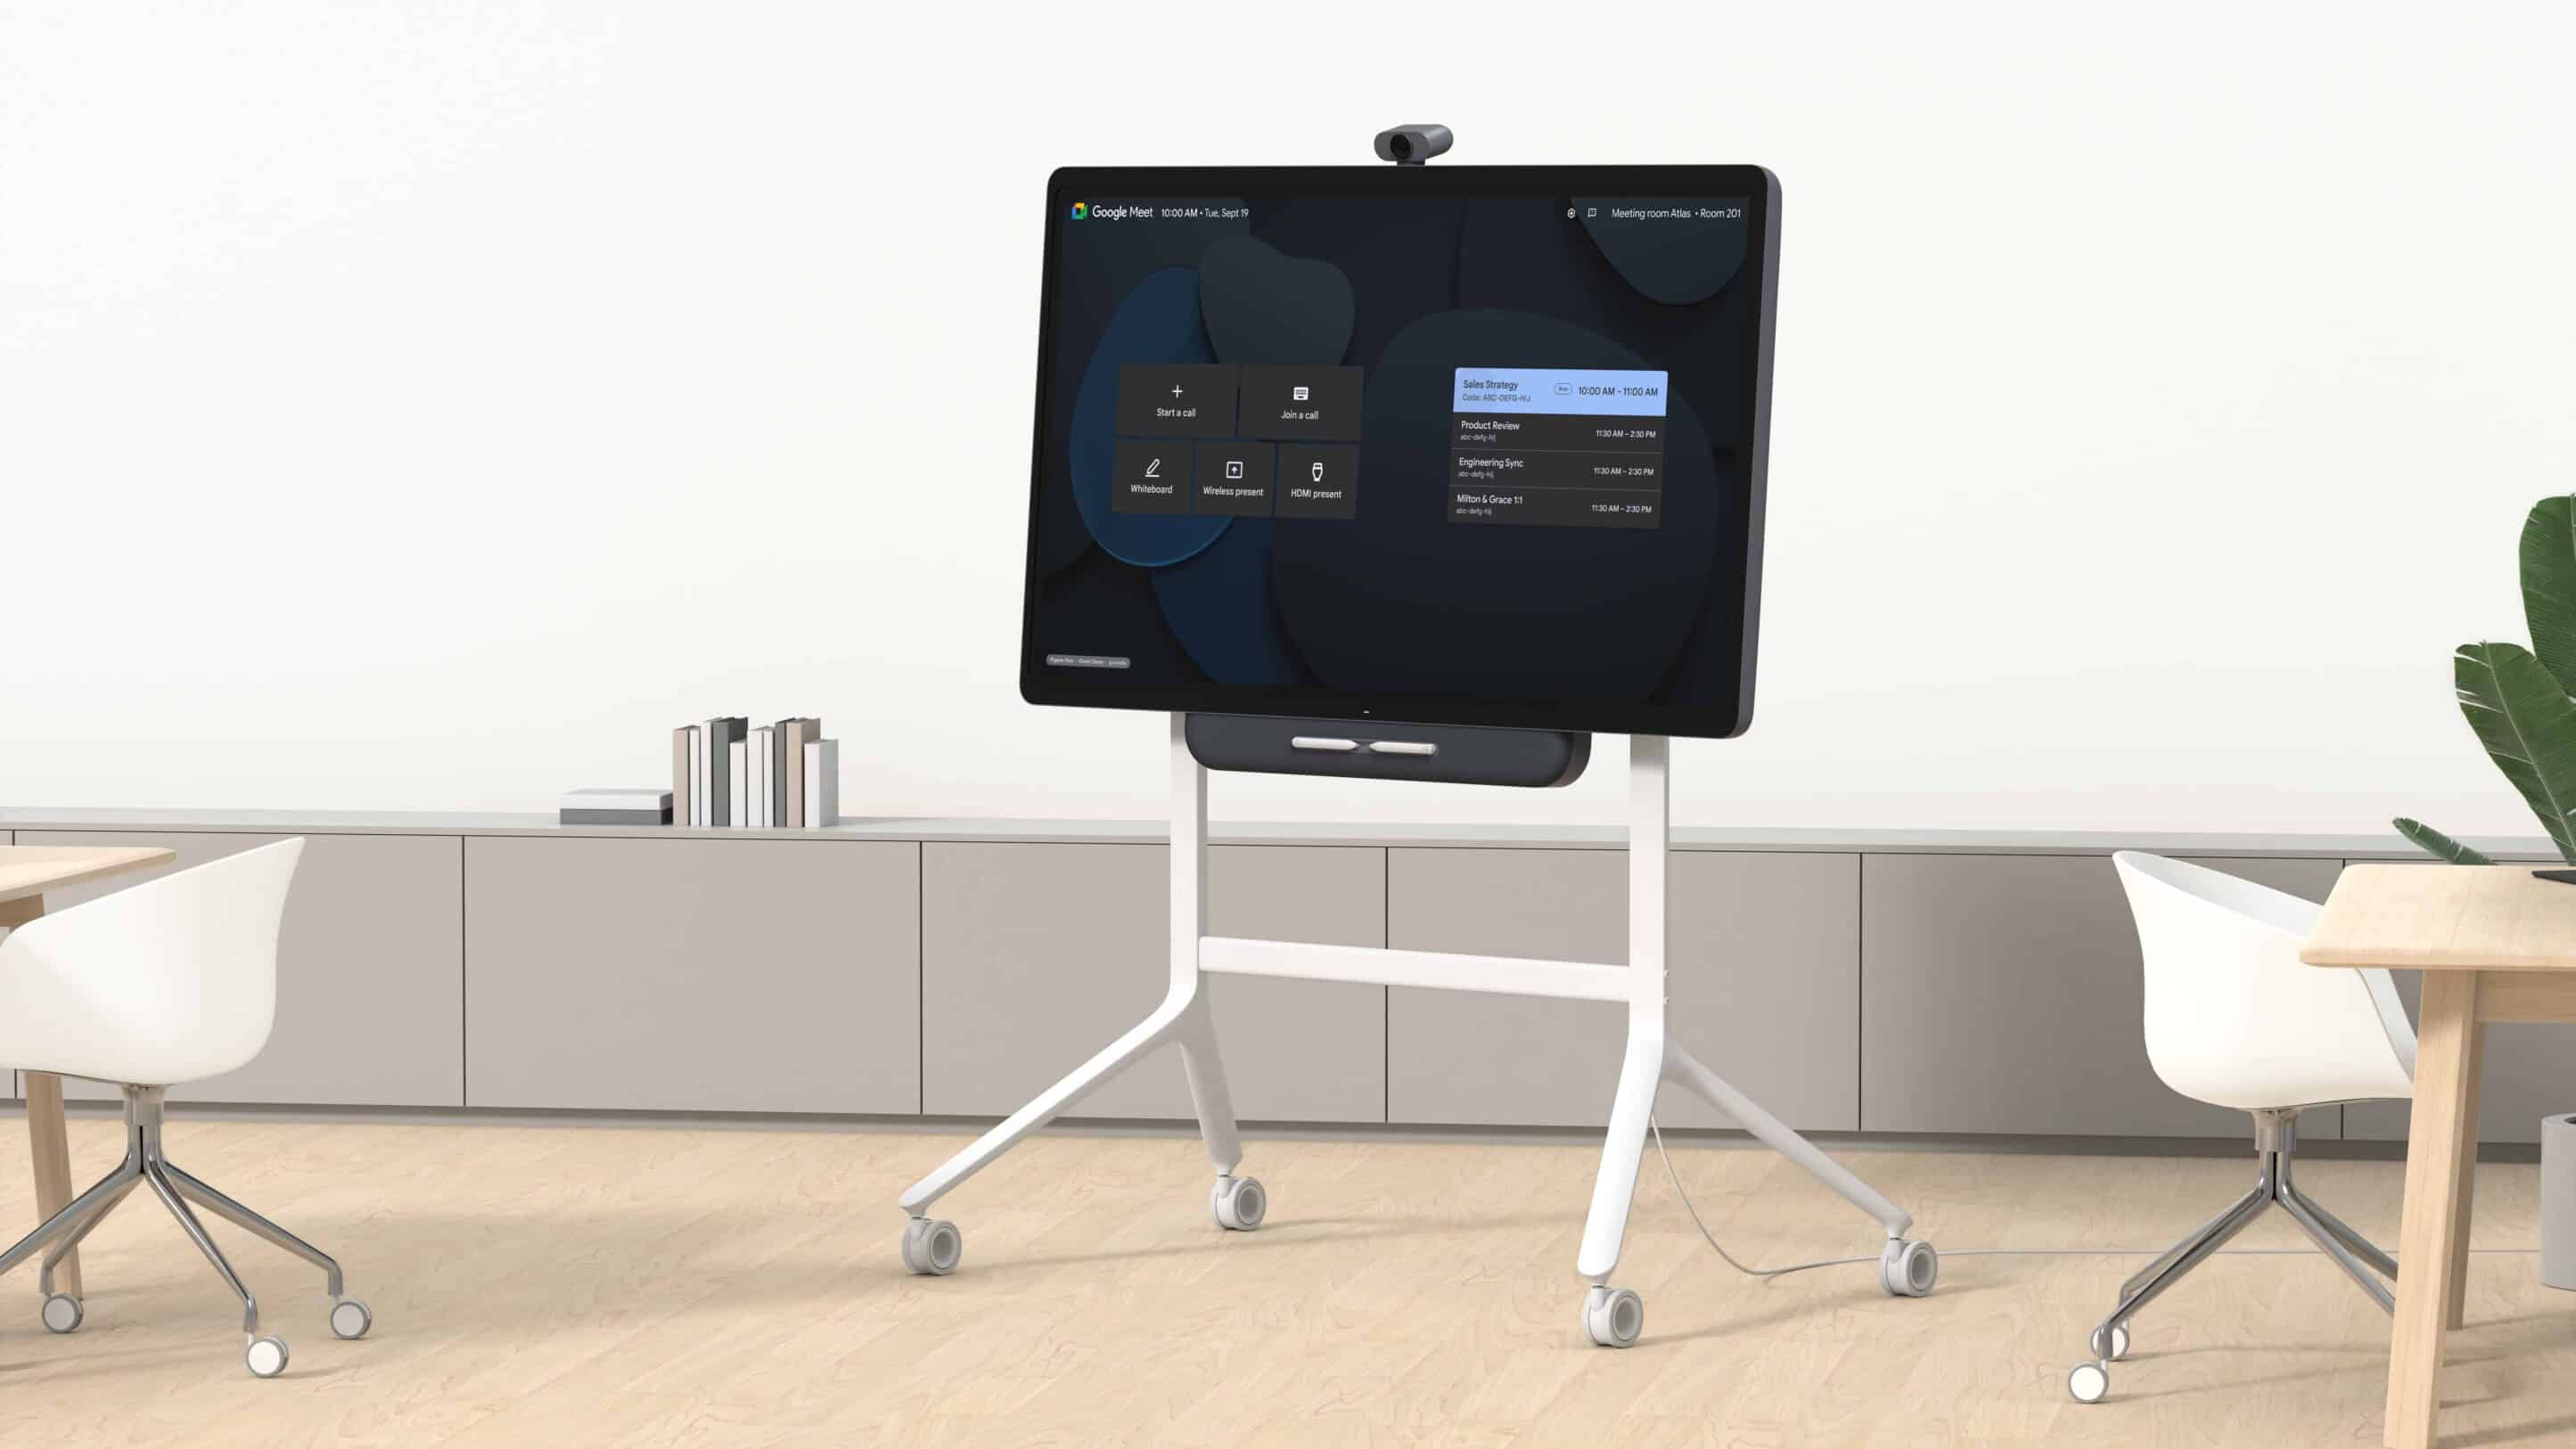 Avocor interactive display technology for digital transformation in the modern workplace